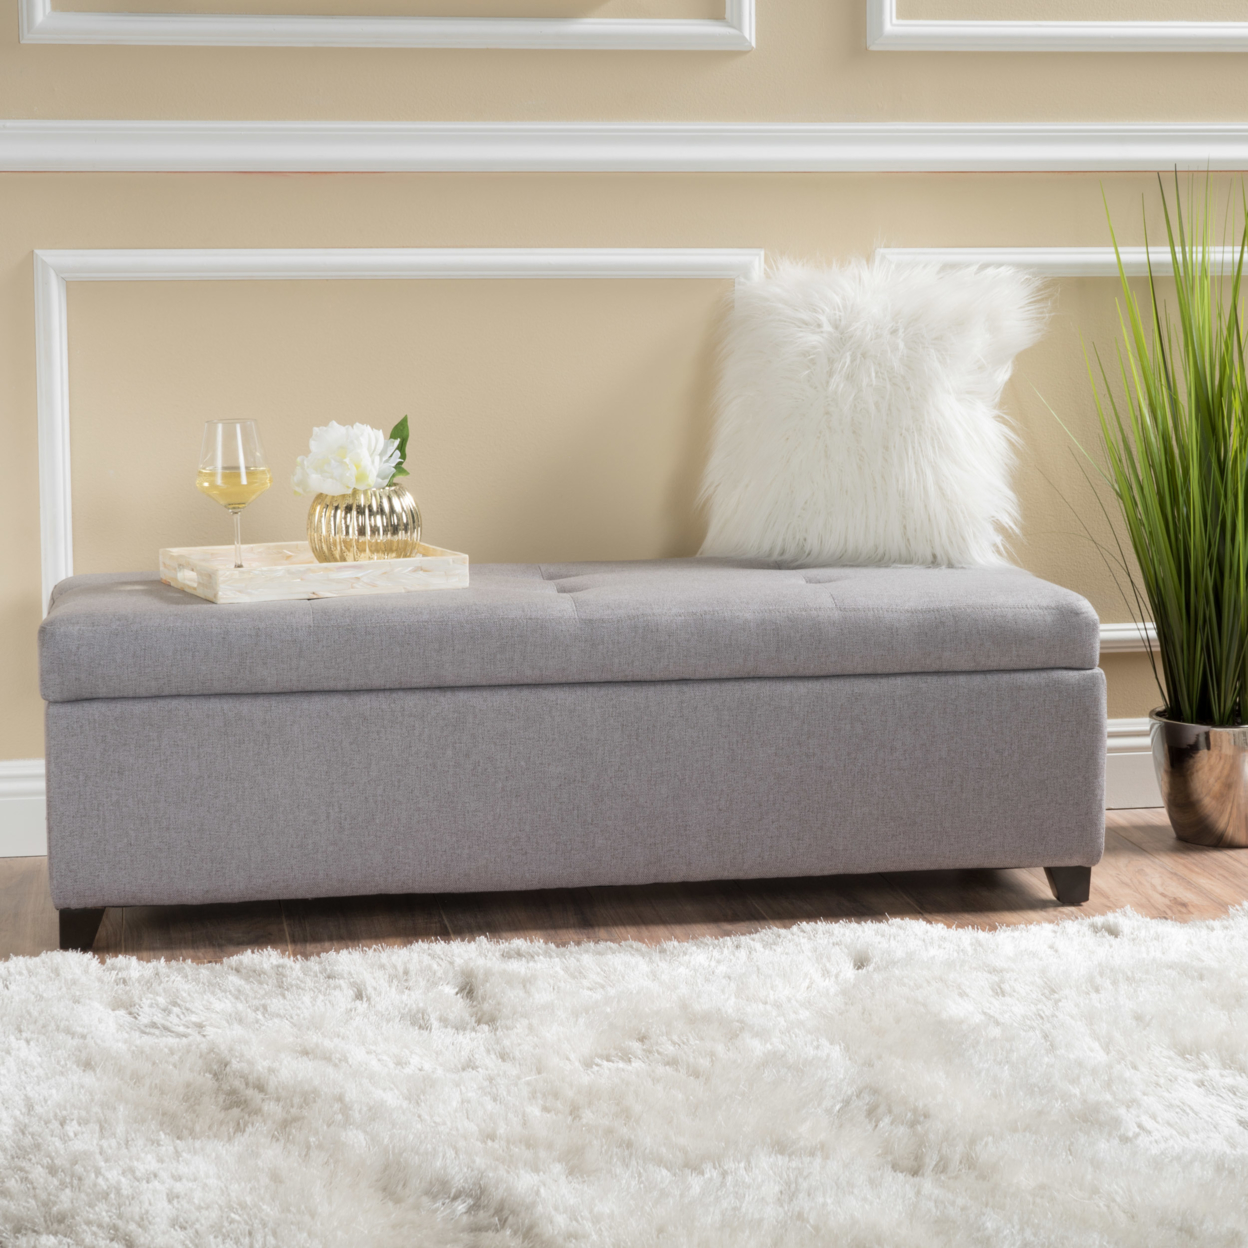 Bajia Tufted Pillow Top Fabric Stoarge Ottoman - Gray